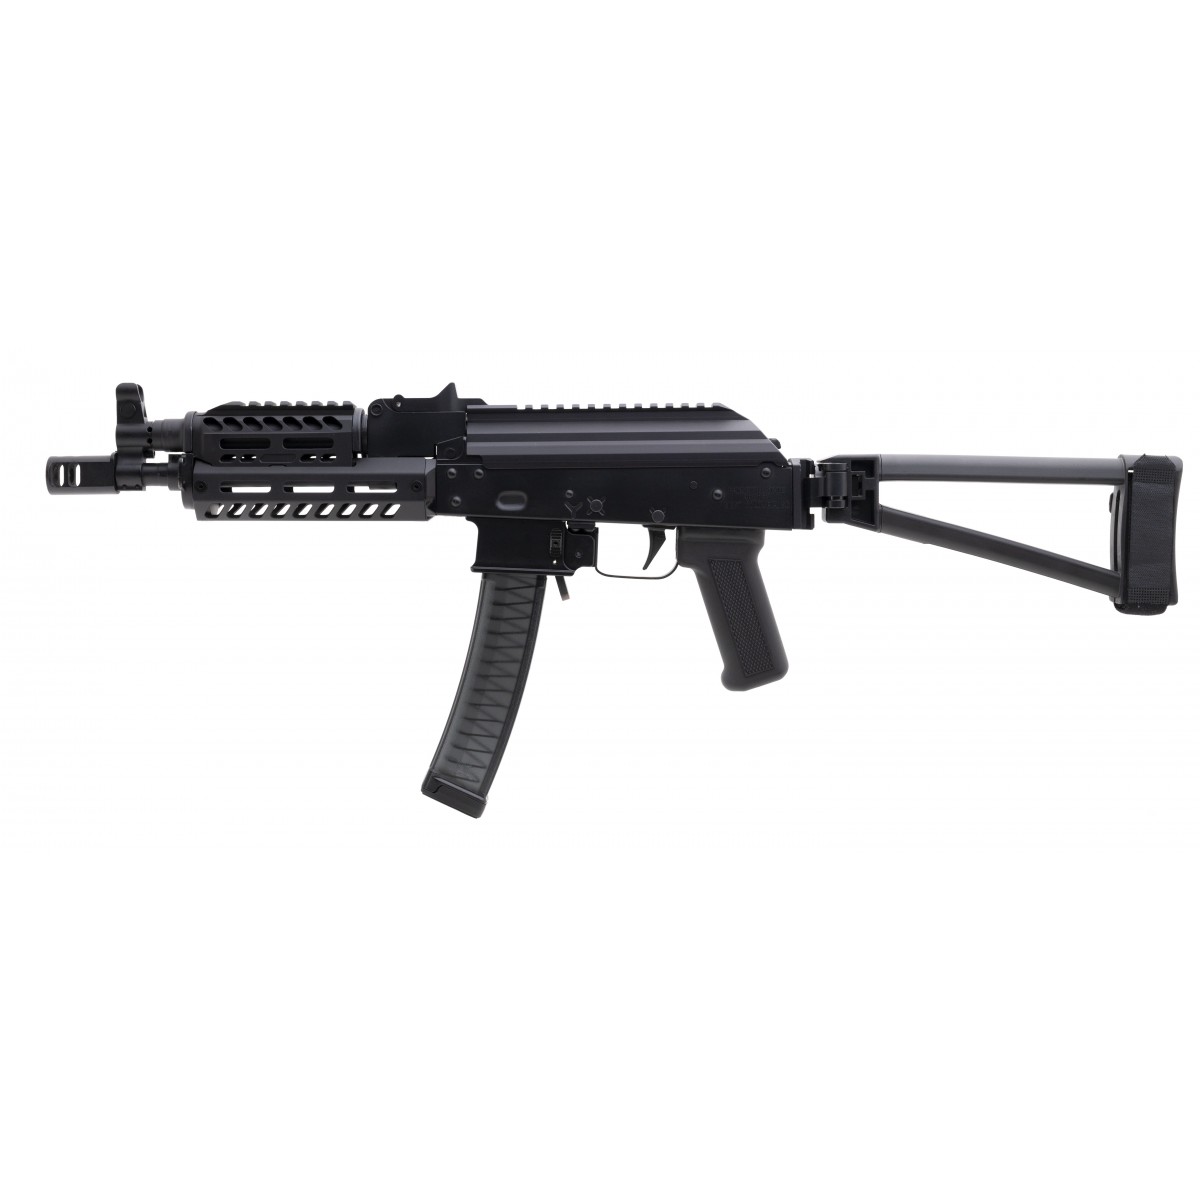 this-is-palmetto-state-armory-s-affordable-mp5-alternative